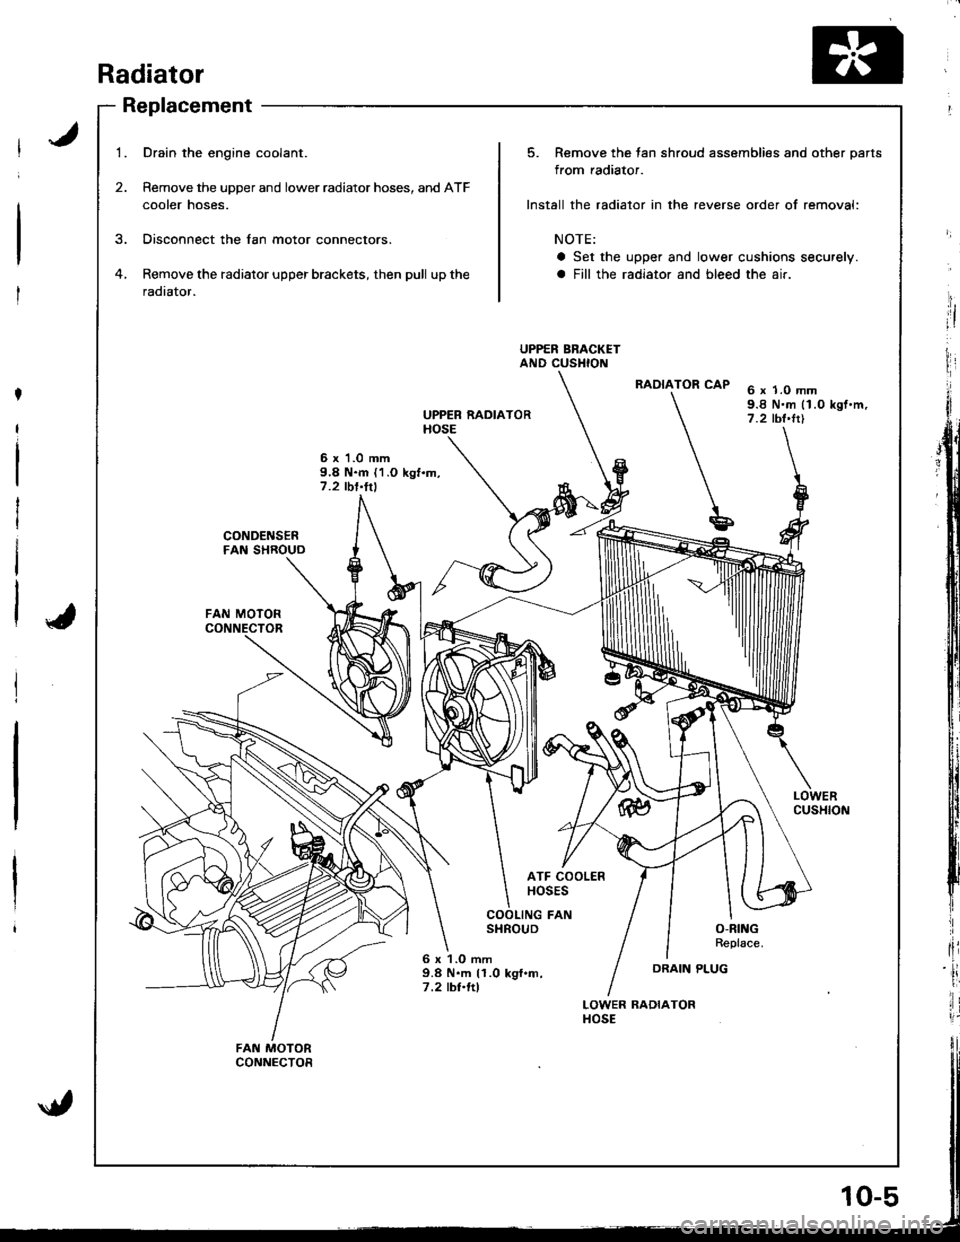 HONDA INTEGRA 1998 4.G Workshop Manual Radiator
Replacement
1.
2.
Drain the engine coolant.
Remove the upper and lower radiator hoses, and ATF
cooler hoses.
Disconnect the lan motor connectors.
Remove the radiator upper brackets, then pull